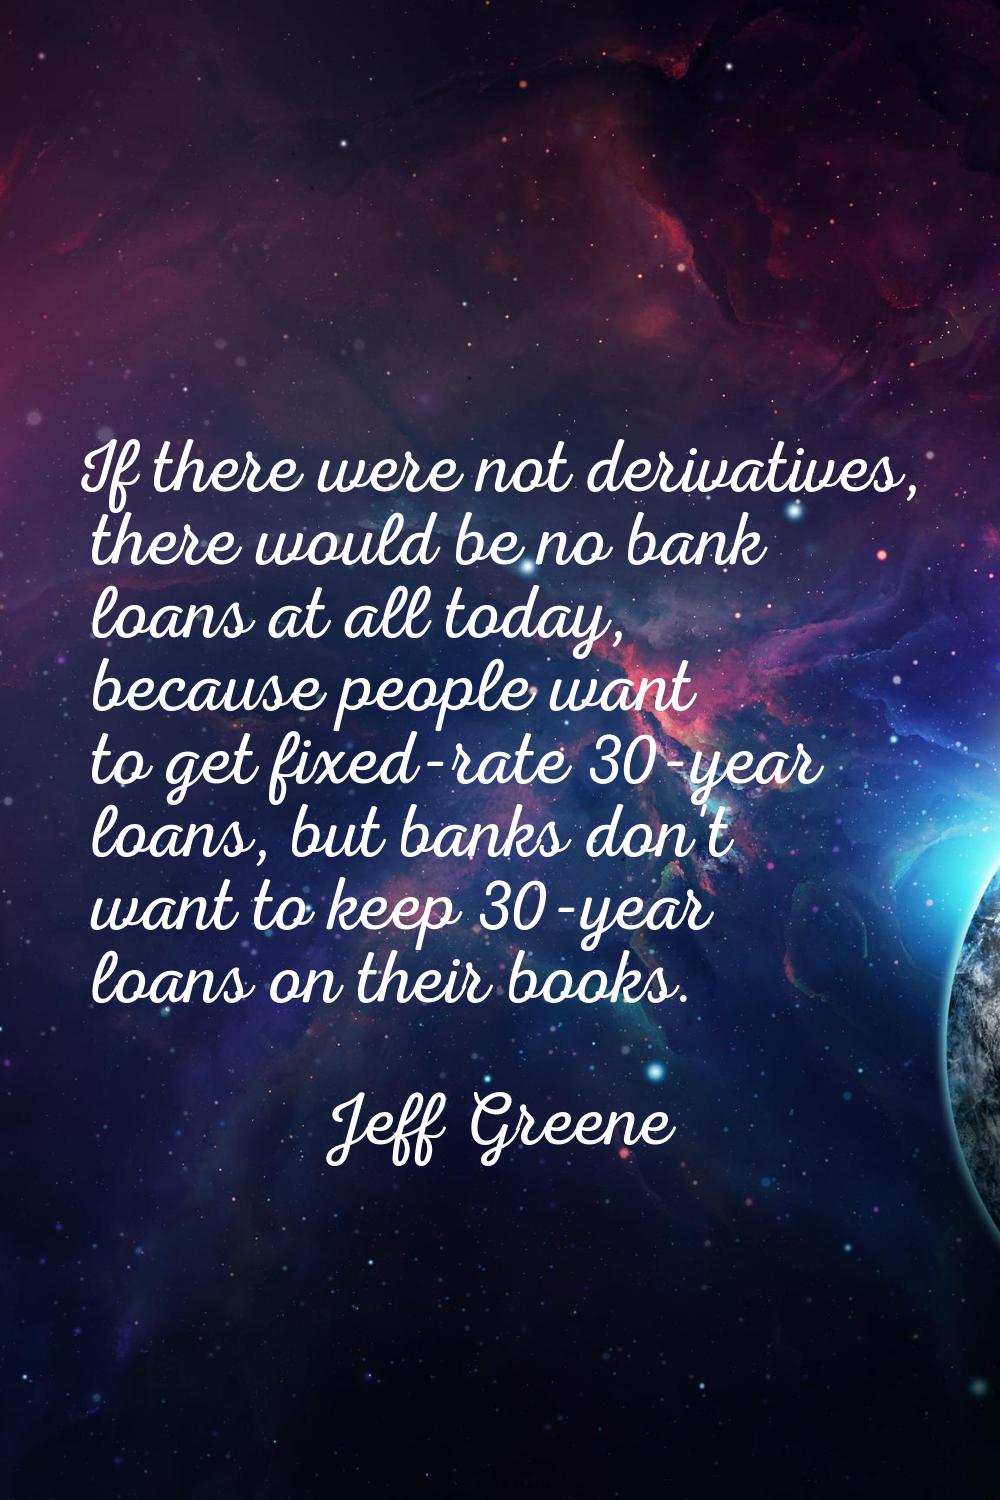 If there were not derivatives, there would be no bank loans at all today, because people want to ge